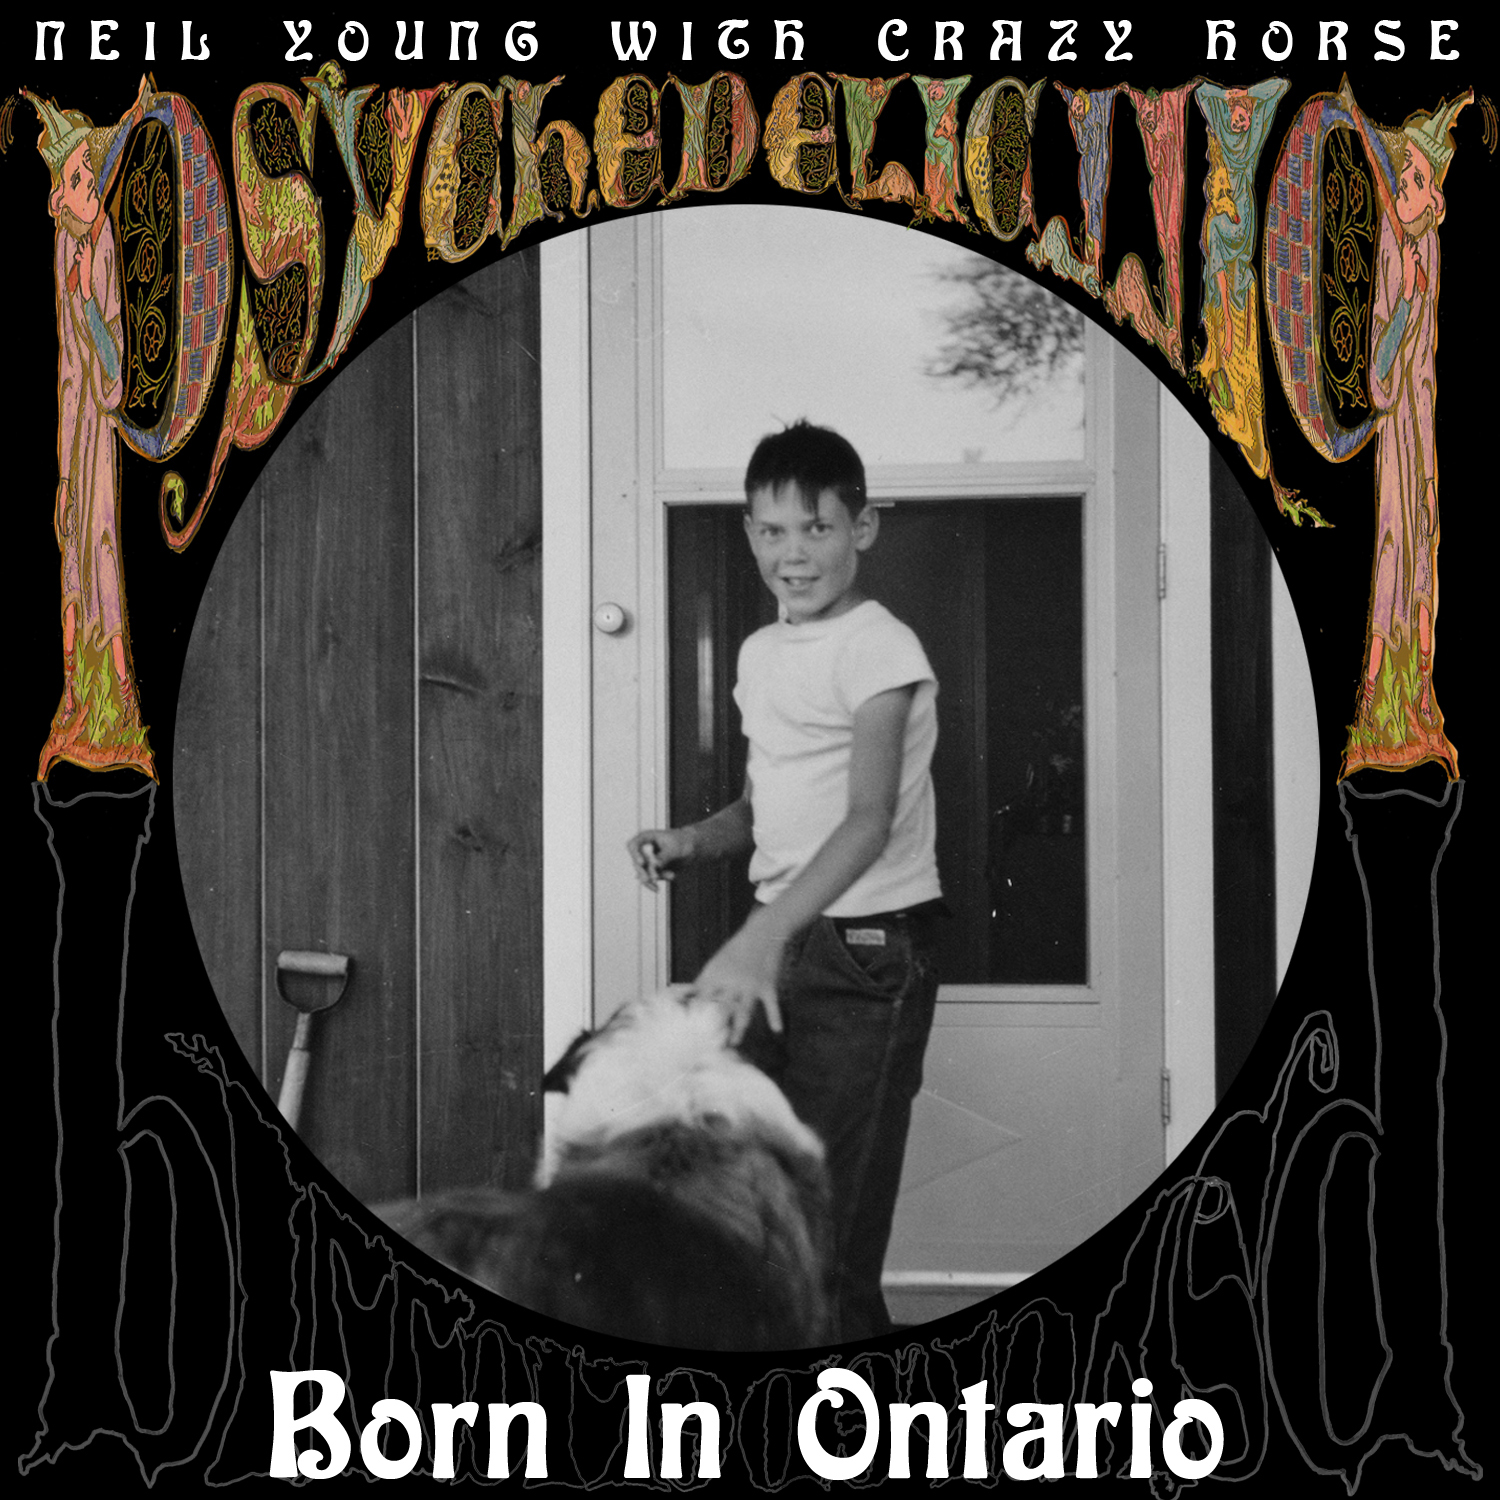 Neil young and crazy horse rust never sleeps фото 83